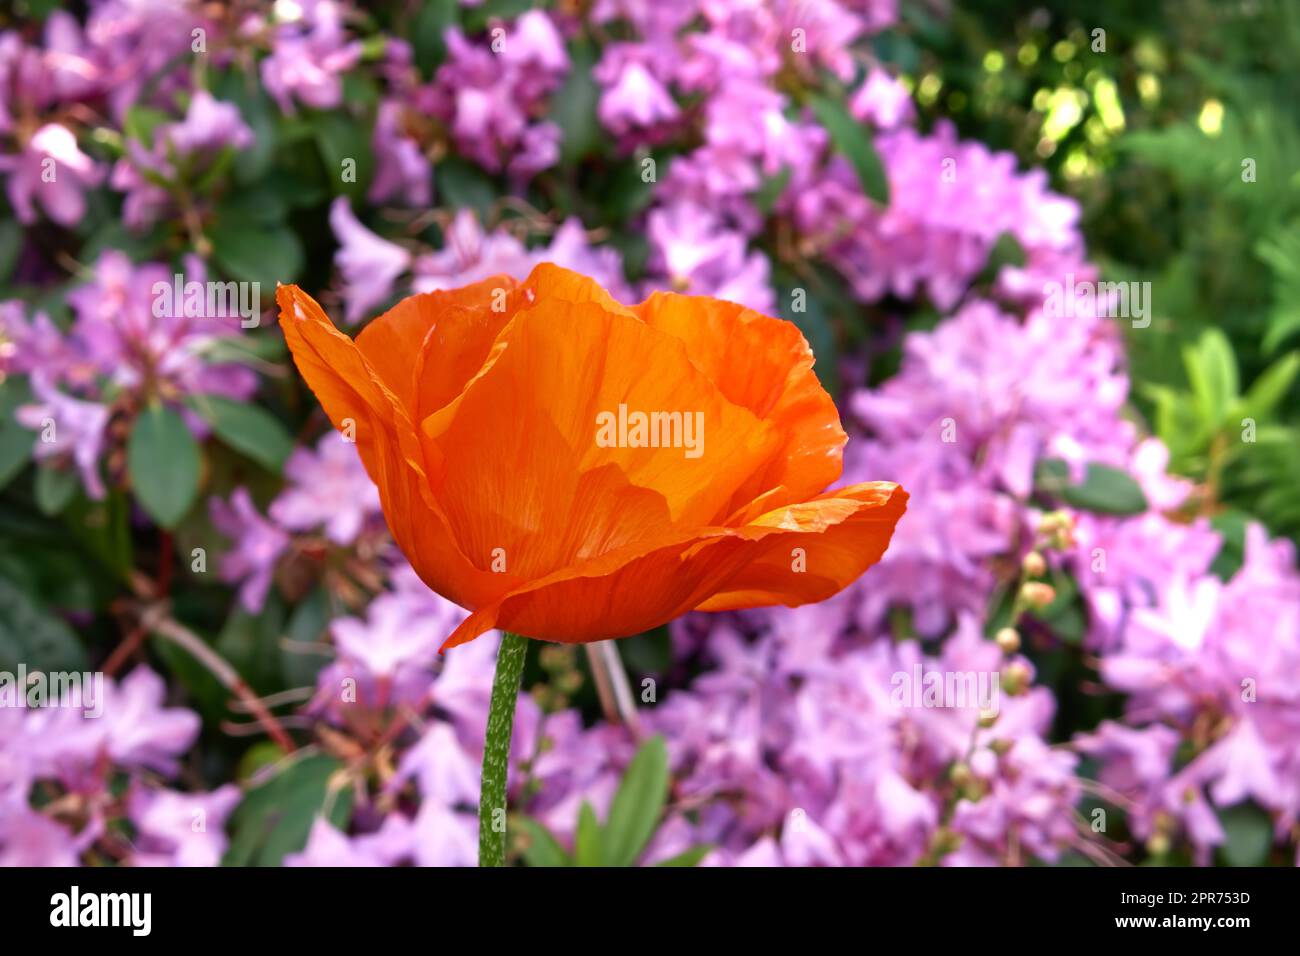 Blooming orange tropicana rose flower in a botanical garden on a sunny day outside. Beautiful flowering plant blooming in a lush green field in spring. Flora flourishing in its natural environment Stock Photo